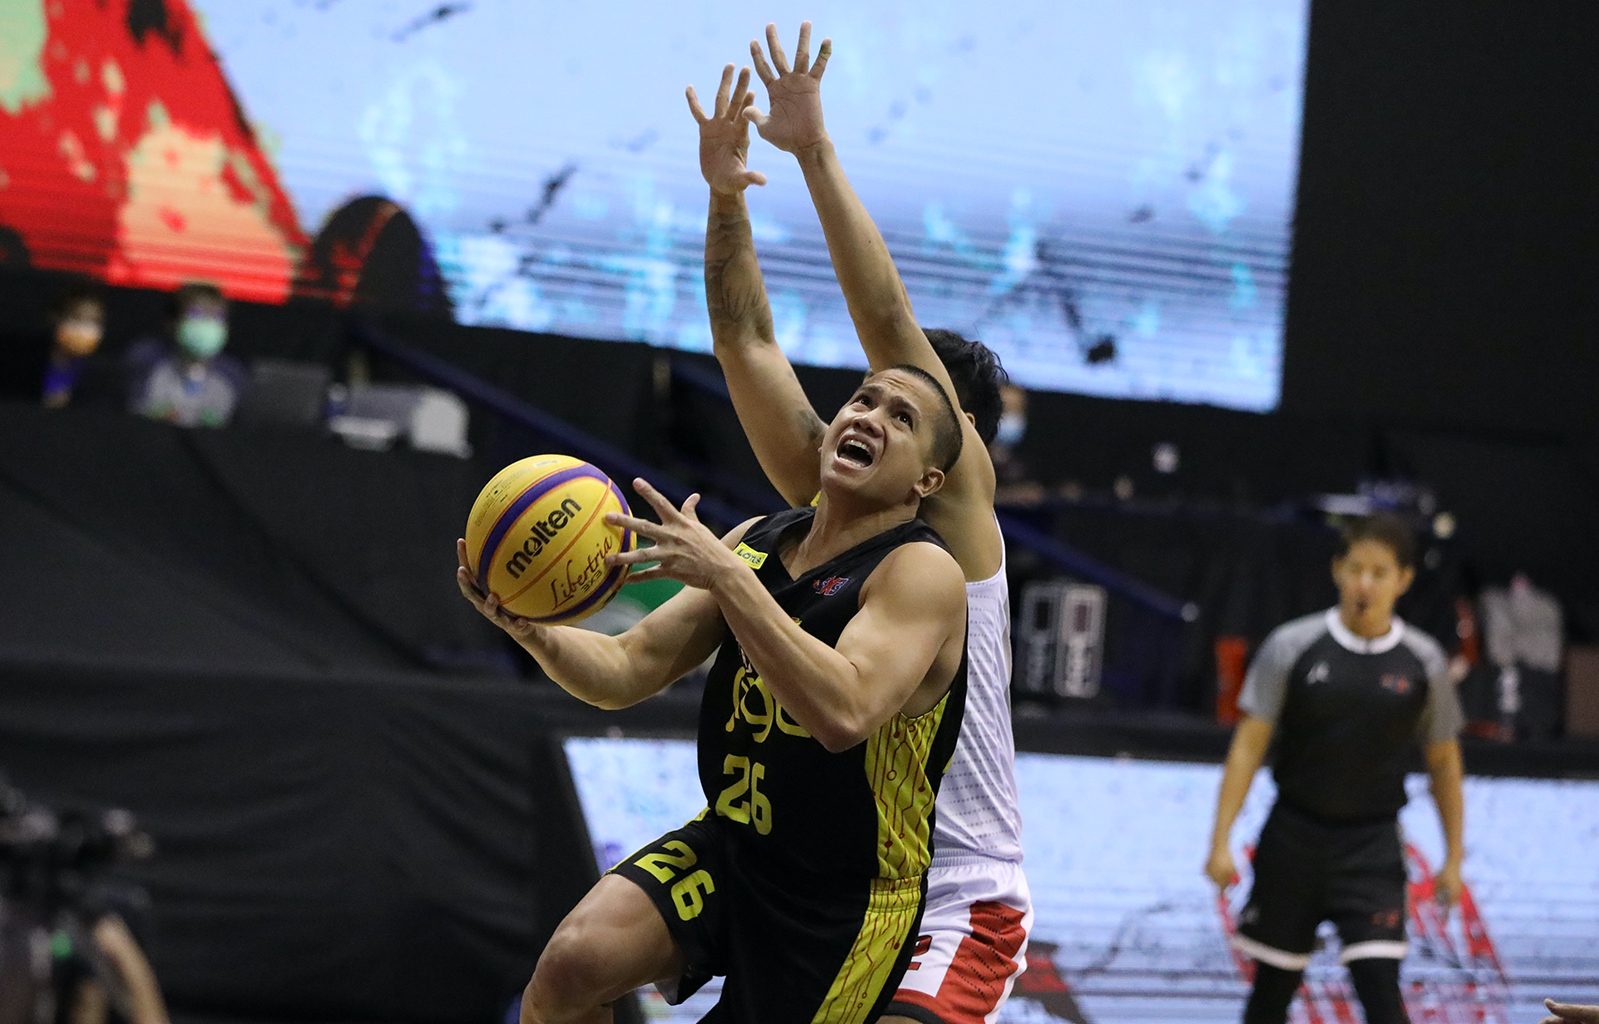 TNT catches PBA 3×3 quarters bus as Ginebra bows out